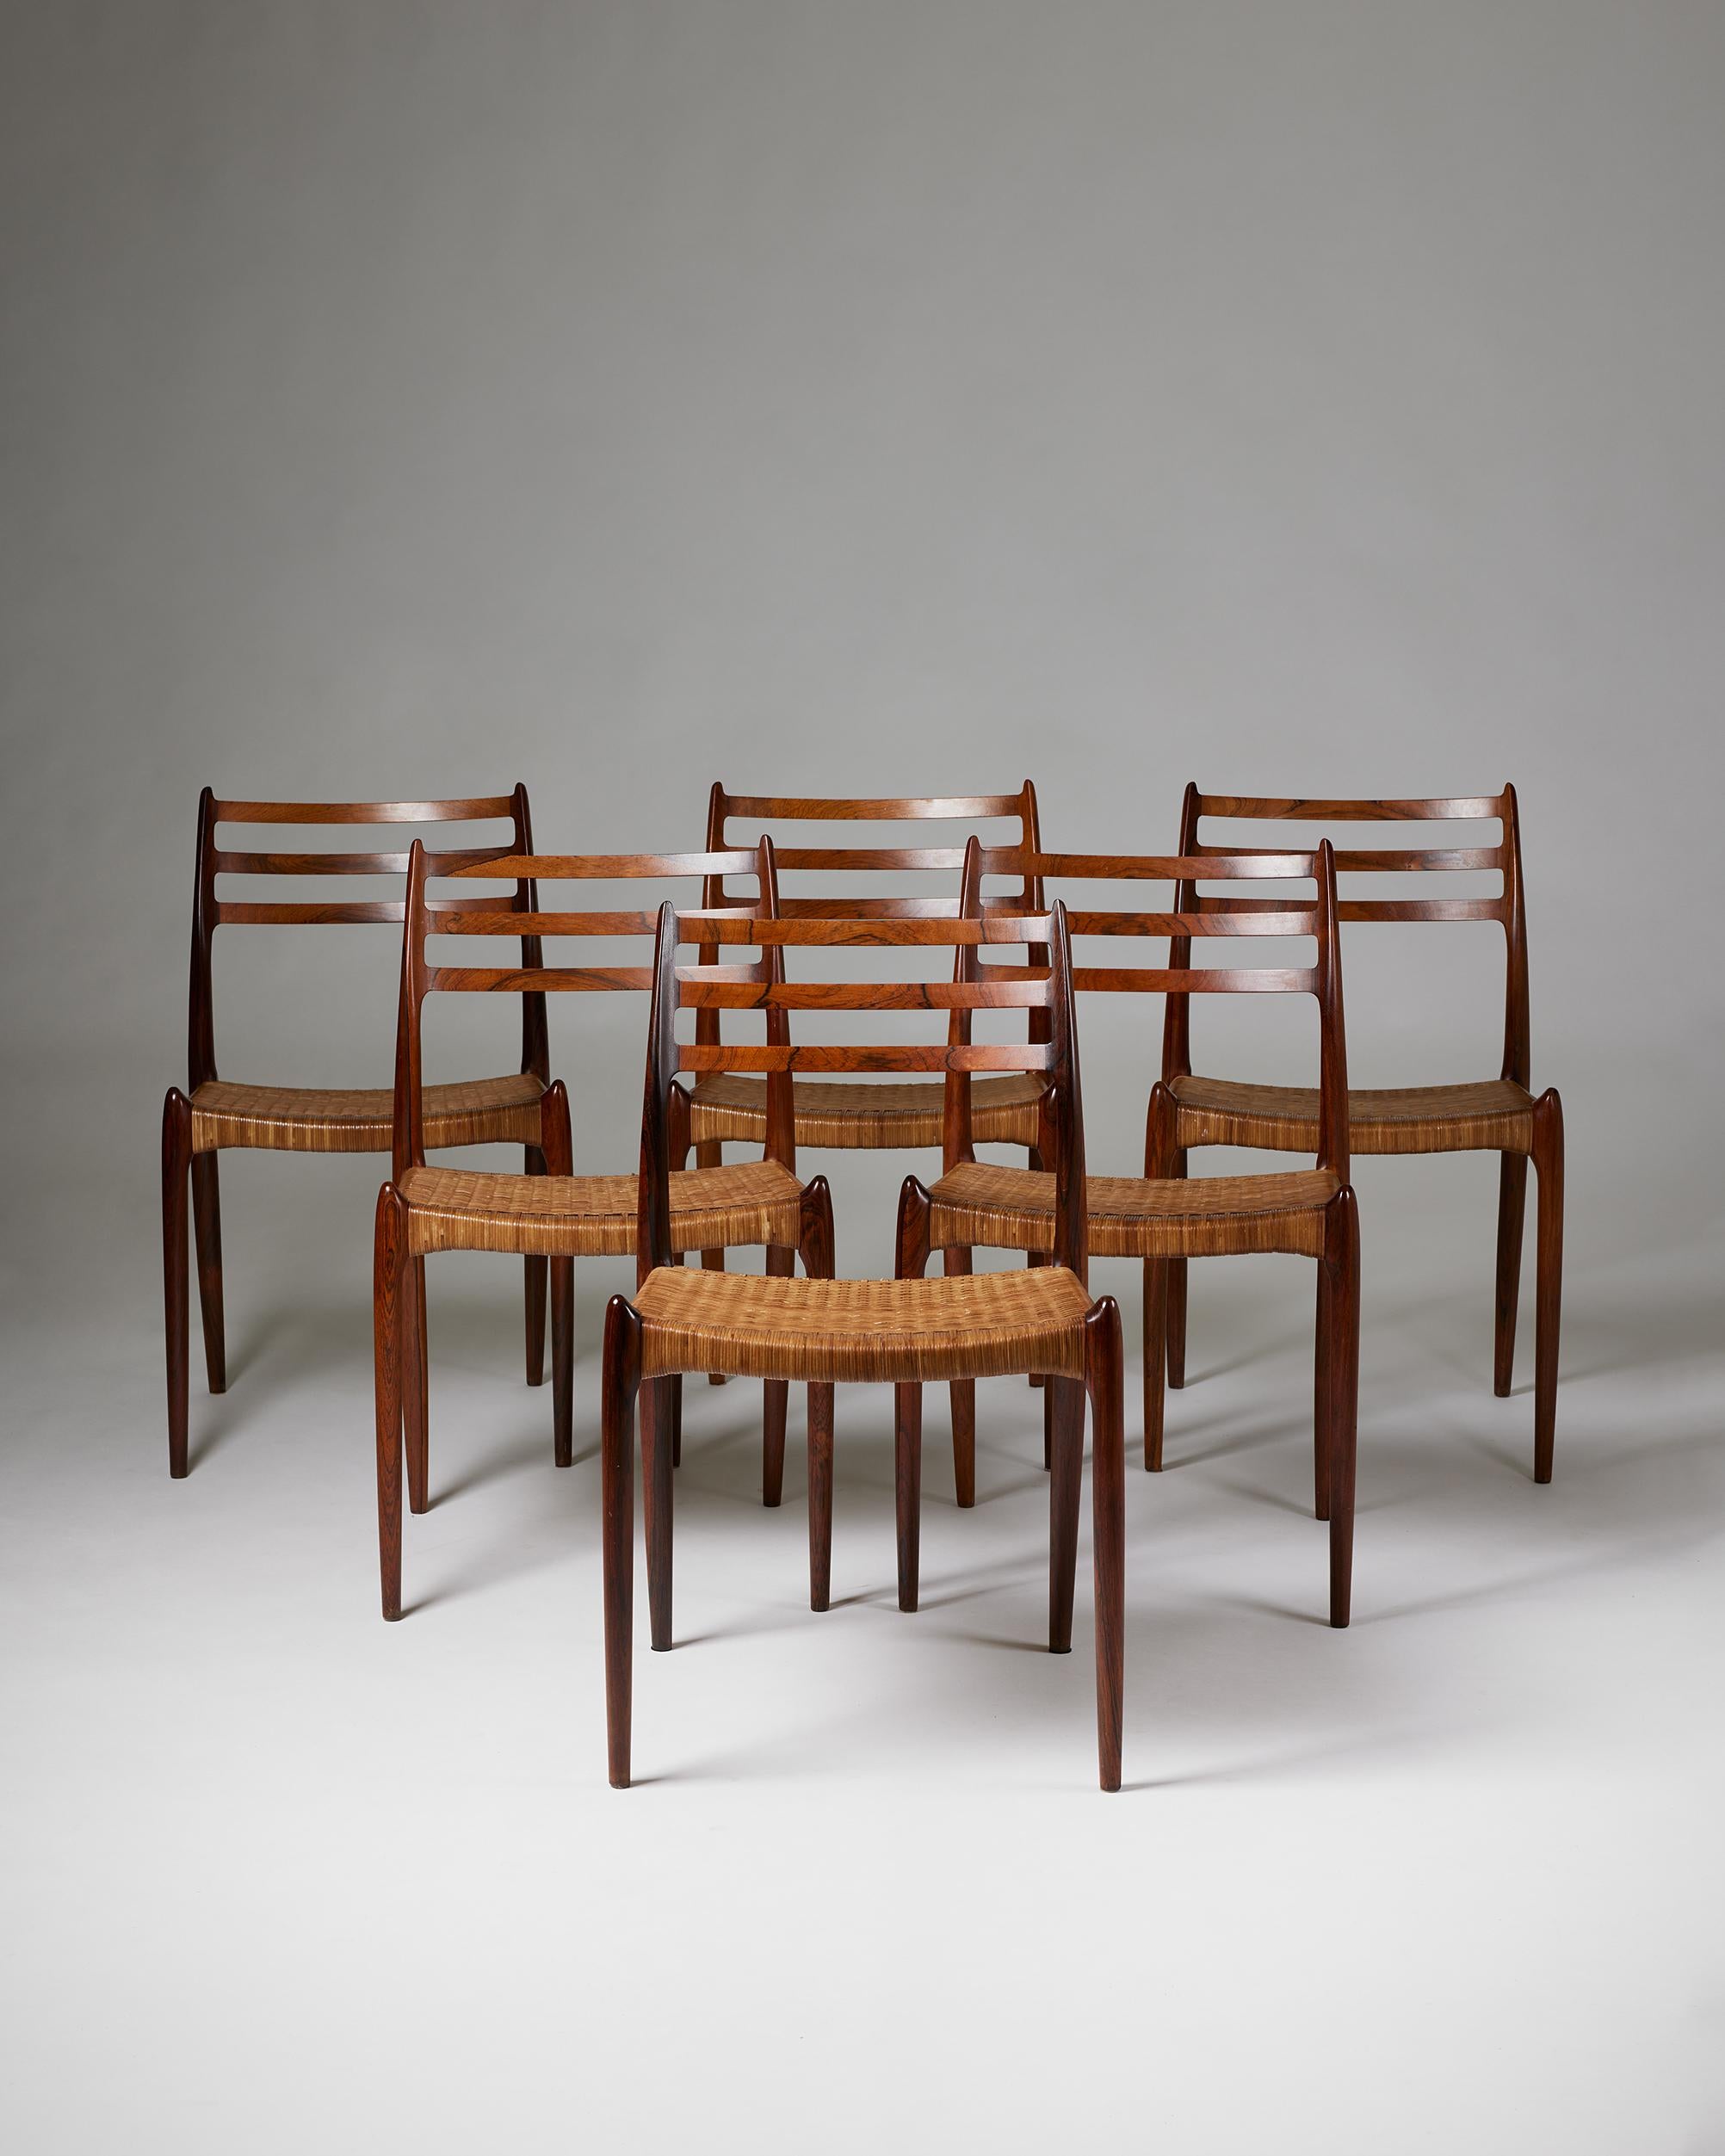 Set of six dining chairs model 78 designed by Niels O. Möller for Möller Höjbjerg,
Denmark, 1962.

Brazilian rosewood and woven cane.

Stamped.

Purchased by the present owner's parents in the 1960s.

H: 81.5 cm / 2' 8''
W: 48.5 cm / 19''
D: 50 cm /